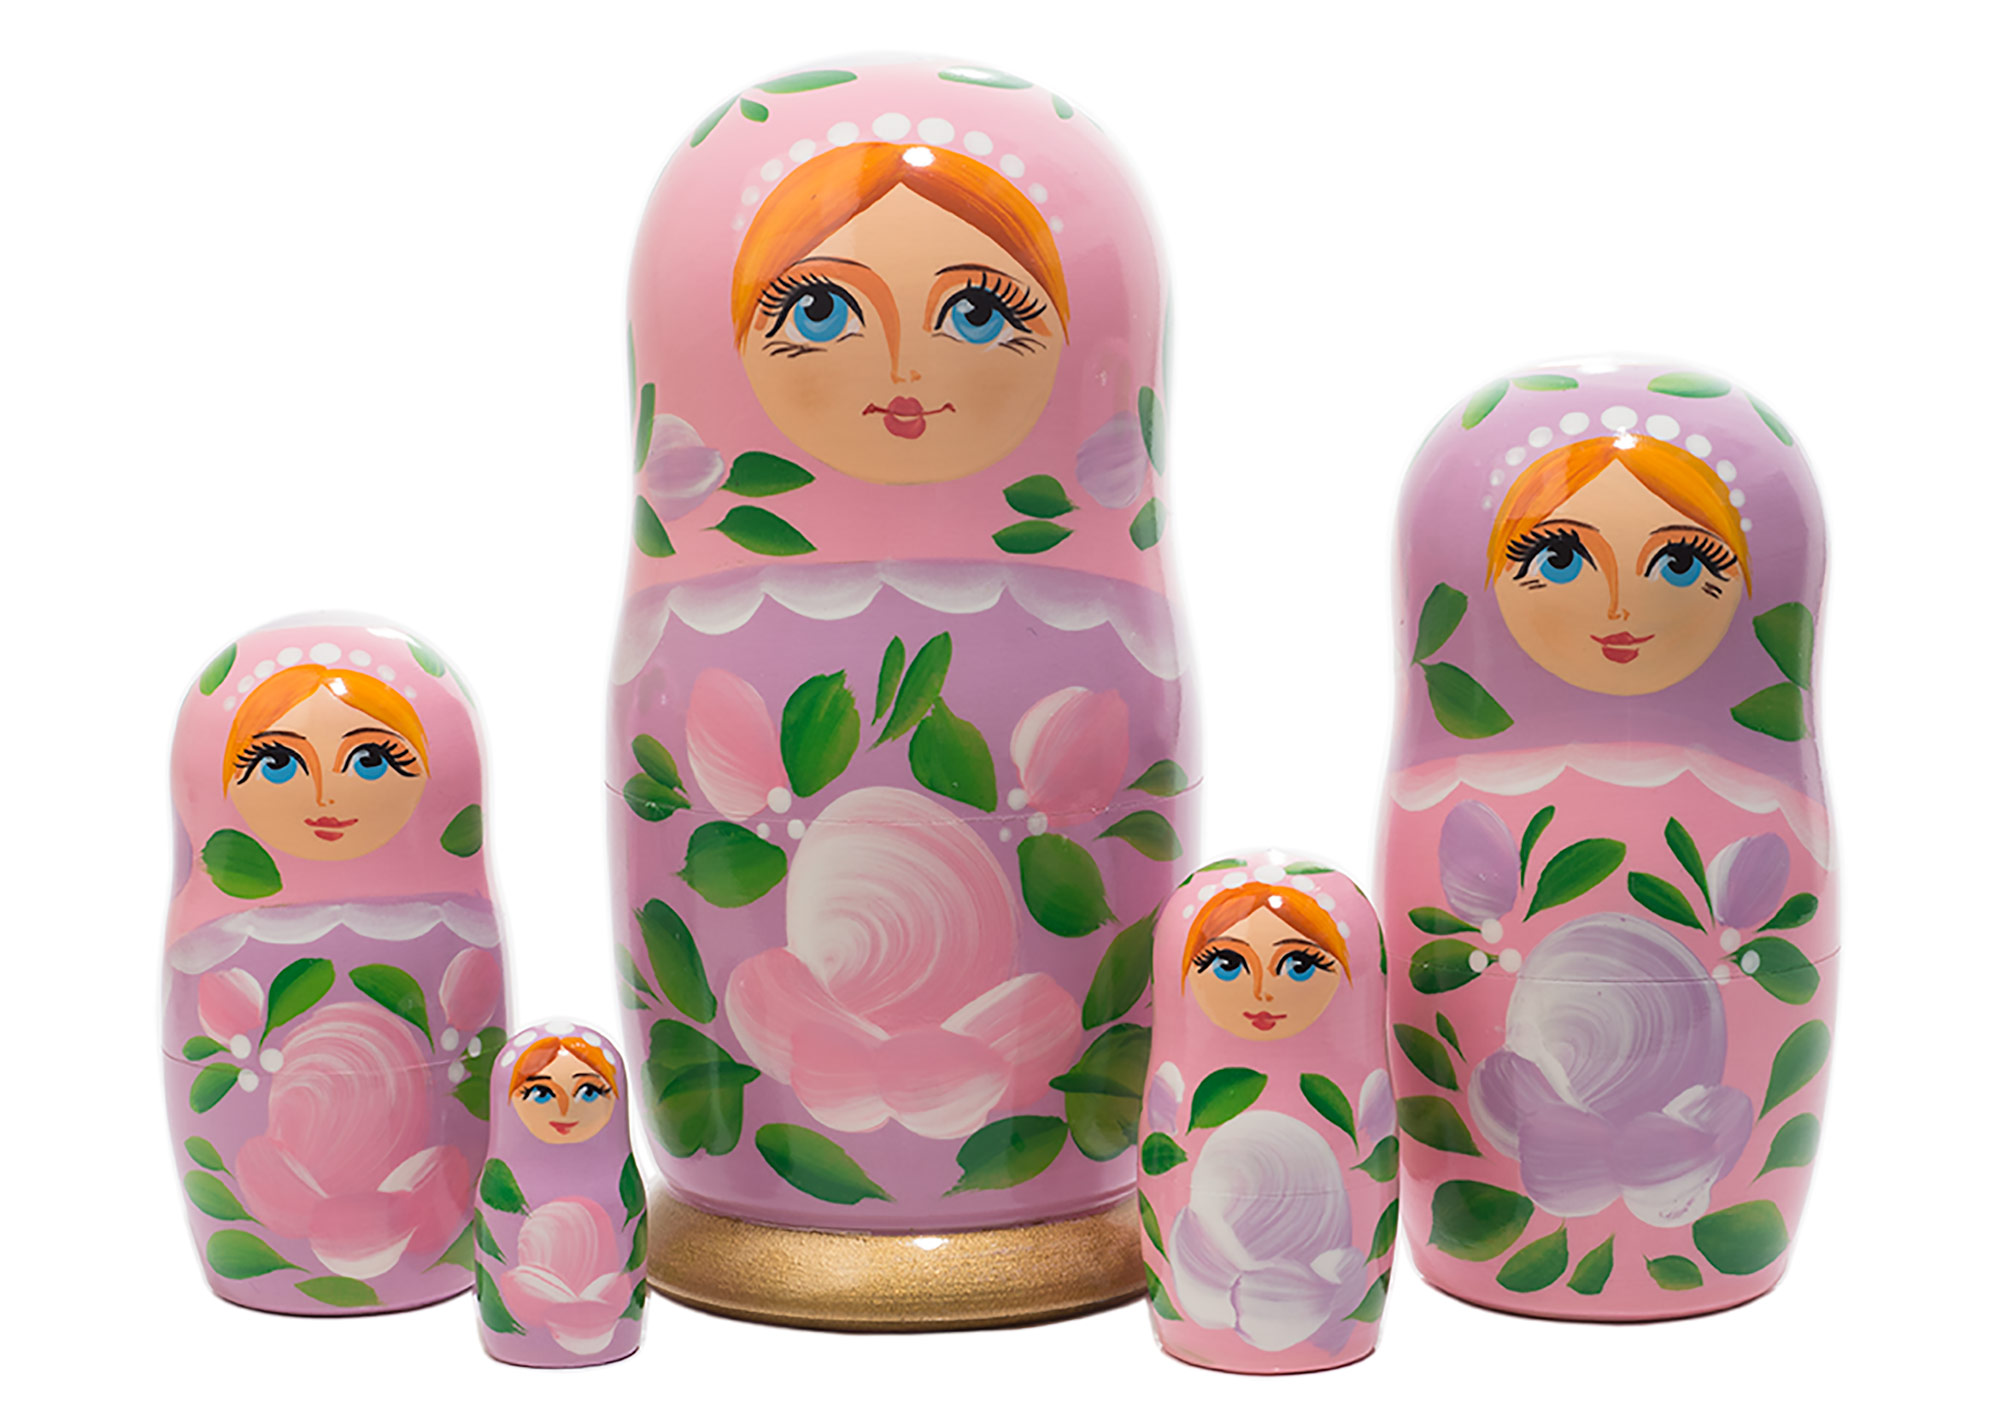 Buy Pink Classical Nesting Doll 5pc./6" - Russian Doll Inside A Doll at GoldenCockerel.com